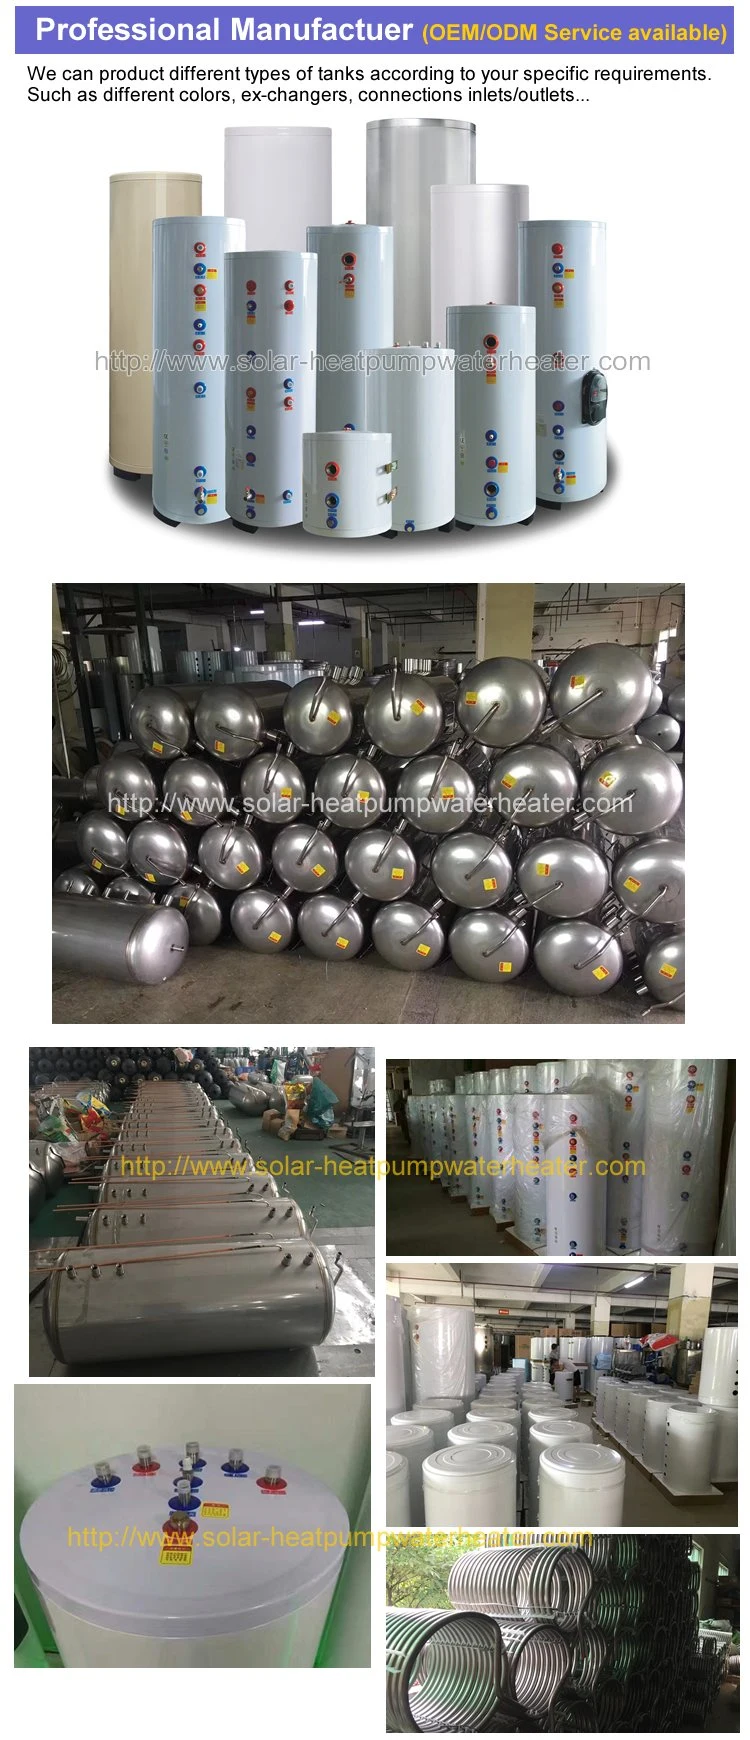 Customized Size Hot Water Storage Tank, Safety Hot Water Reserve Tank